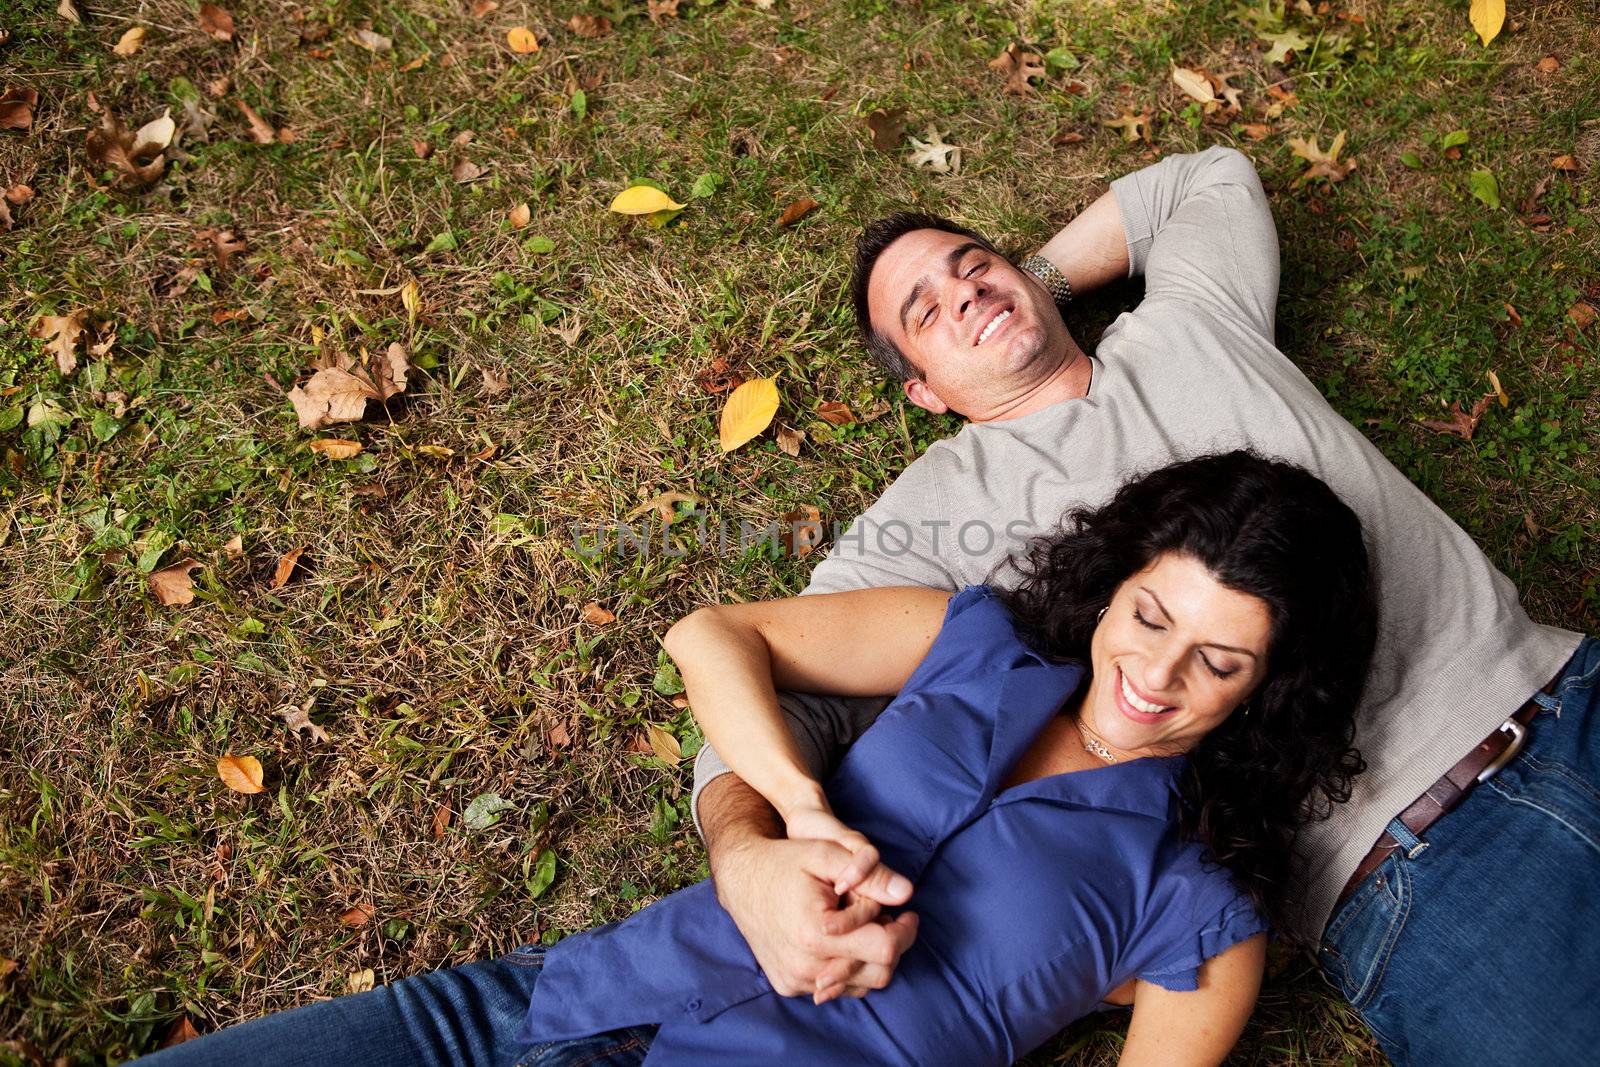 A happy couple daydreaming in a park on grass - sharp focus on man